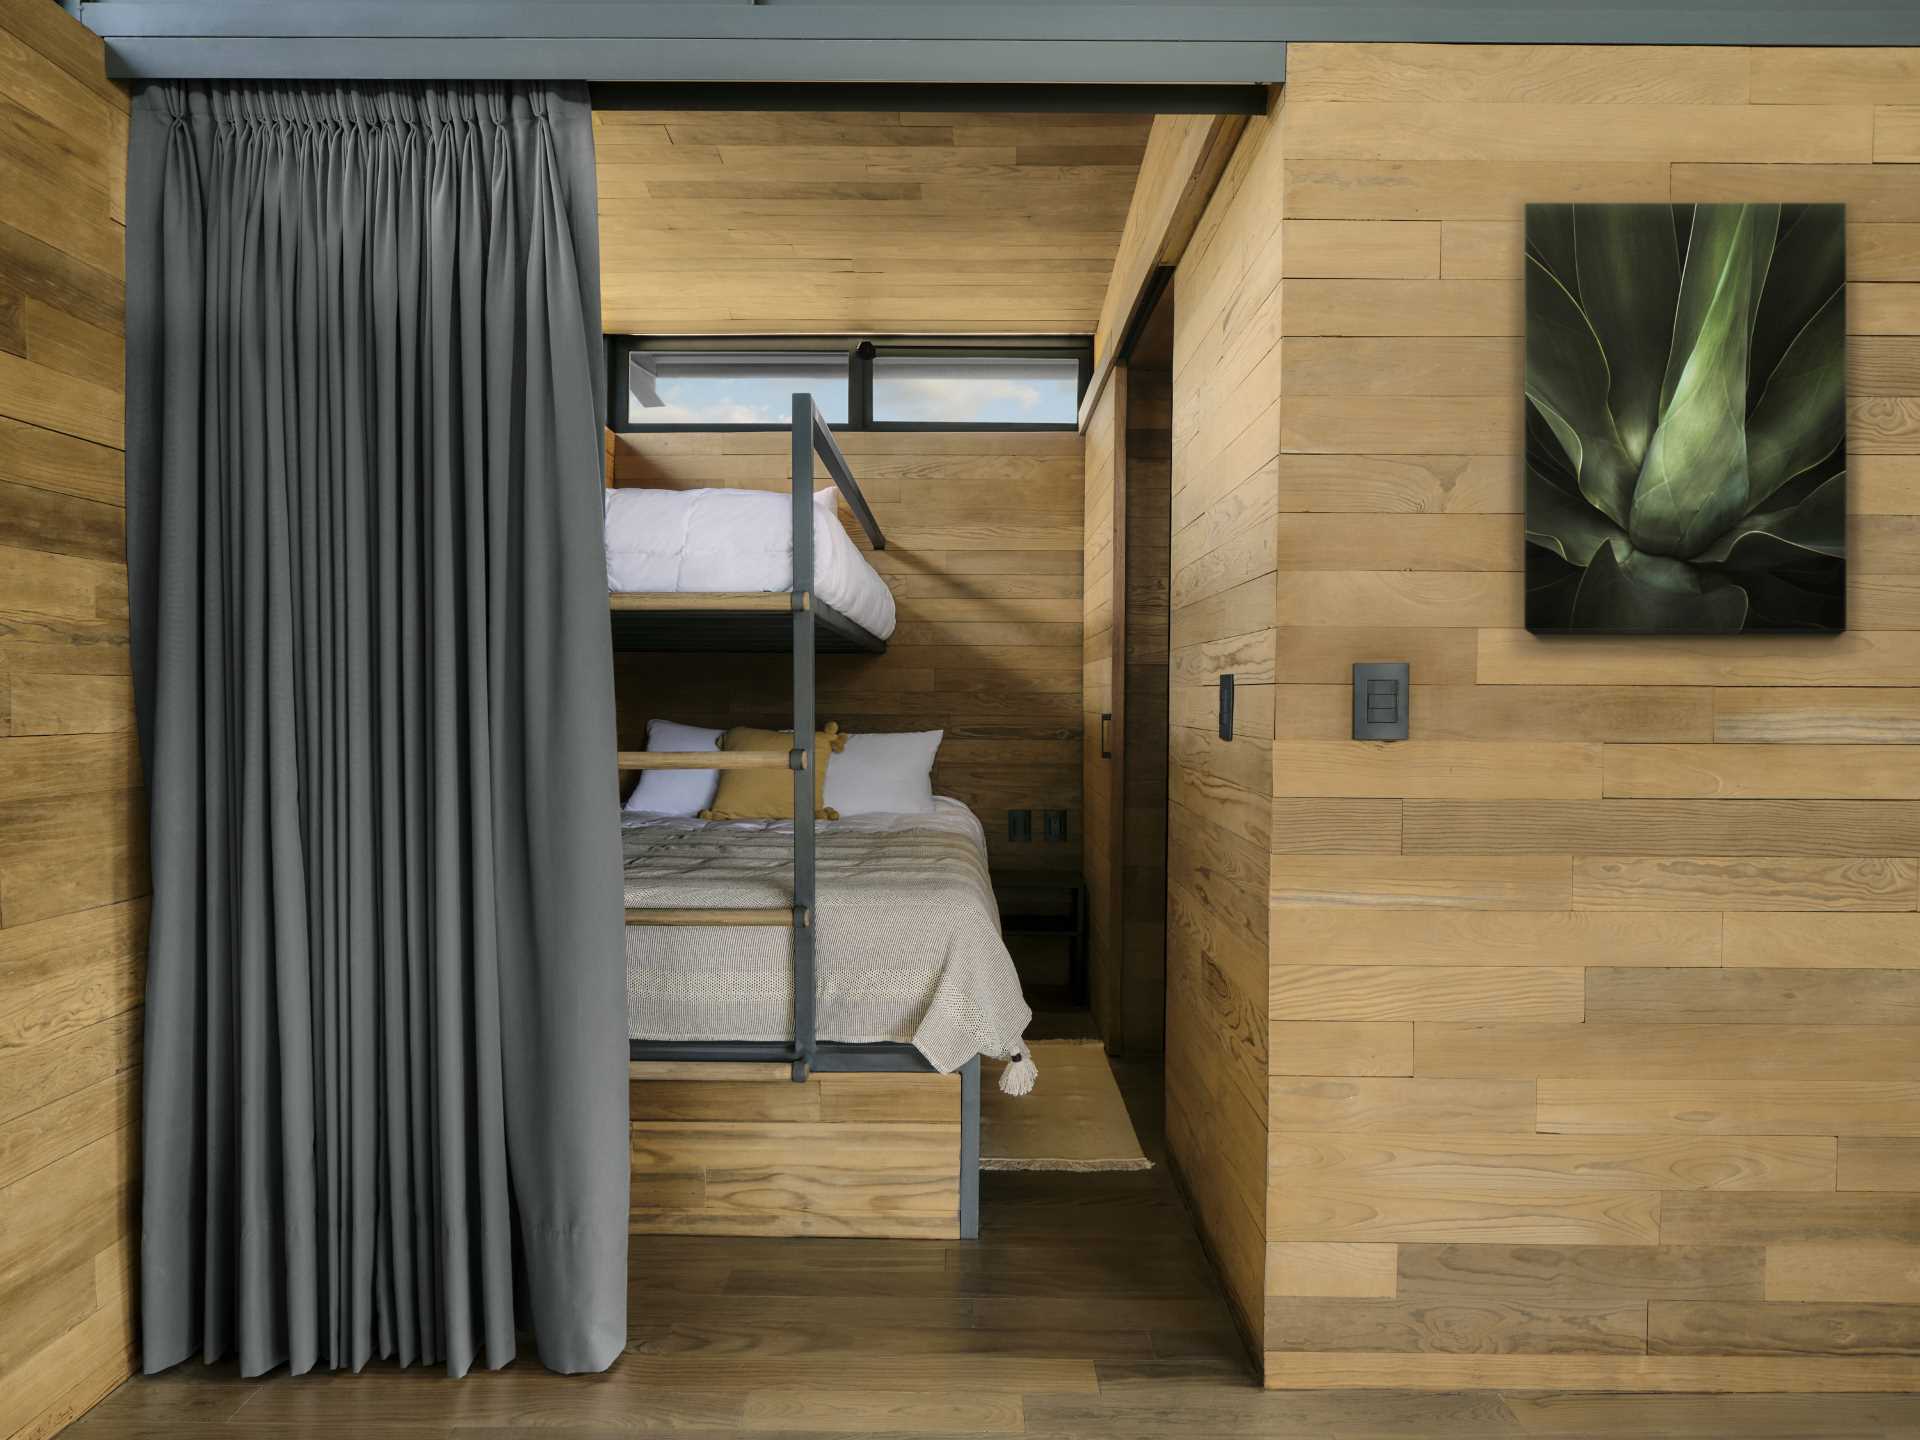 Two bedrooms with bunk beds are separated by a bathroom.